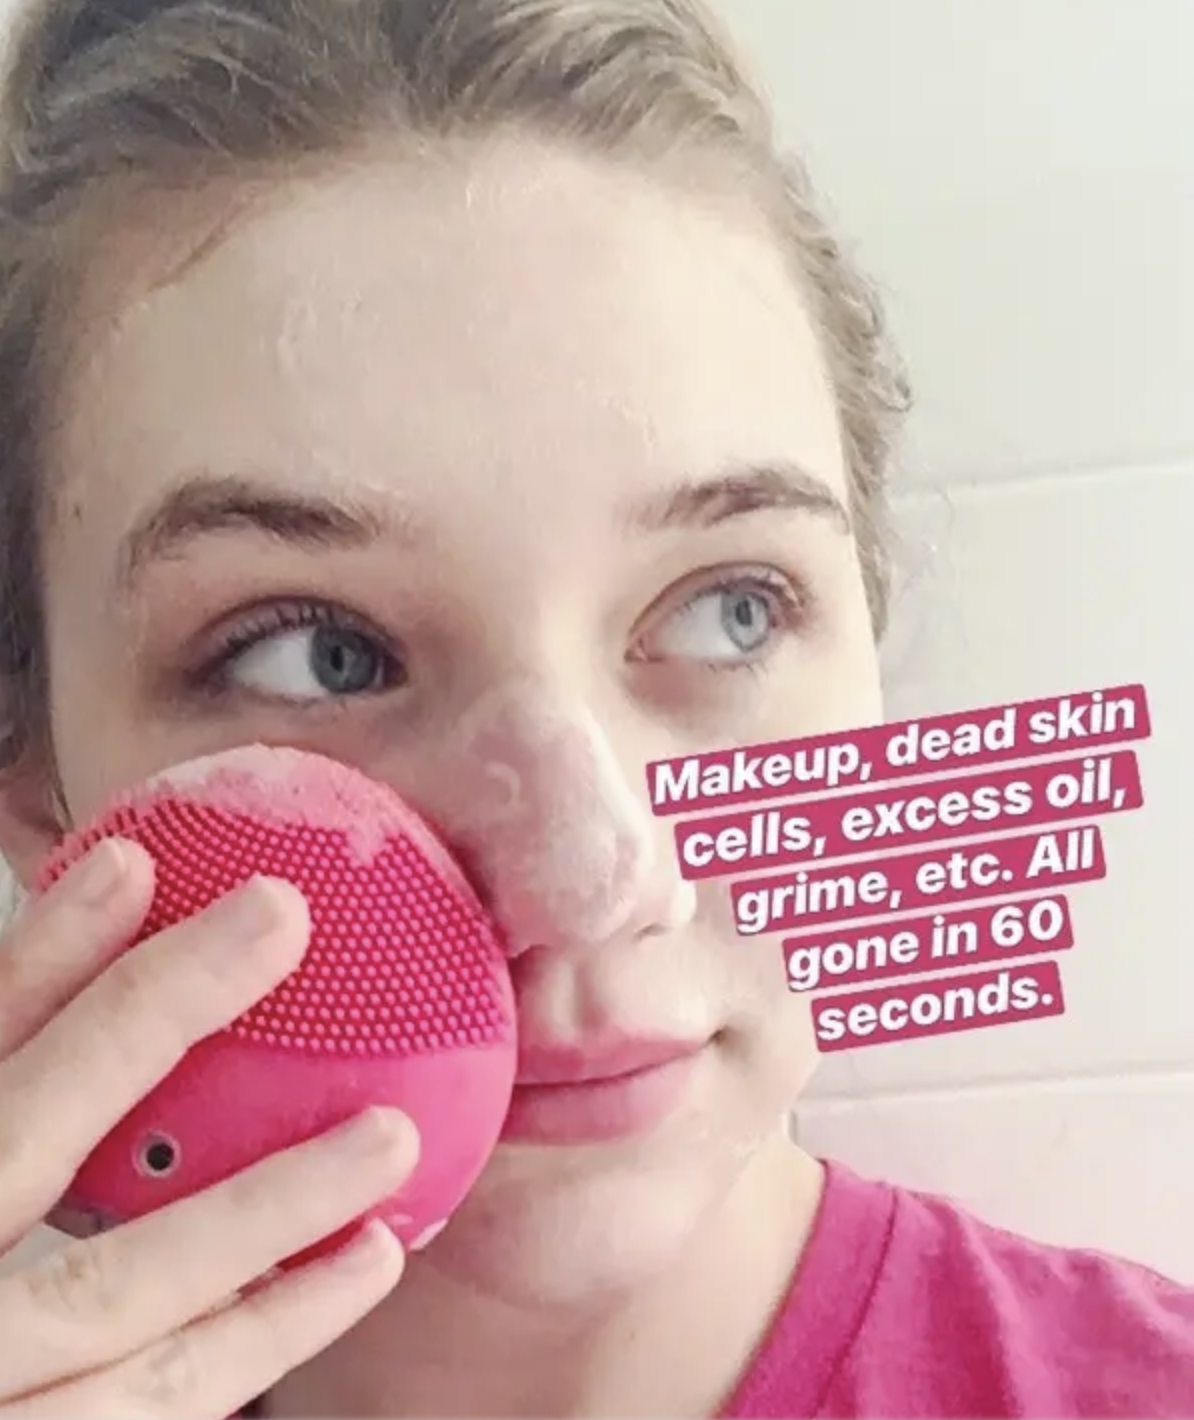 BuzzFeed editor using small pink silicone face washing device with text &quot;makeup, dead skin cells, excess oil, grime, etc. All gone in 60 seconds&quot; 